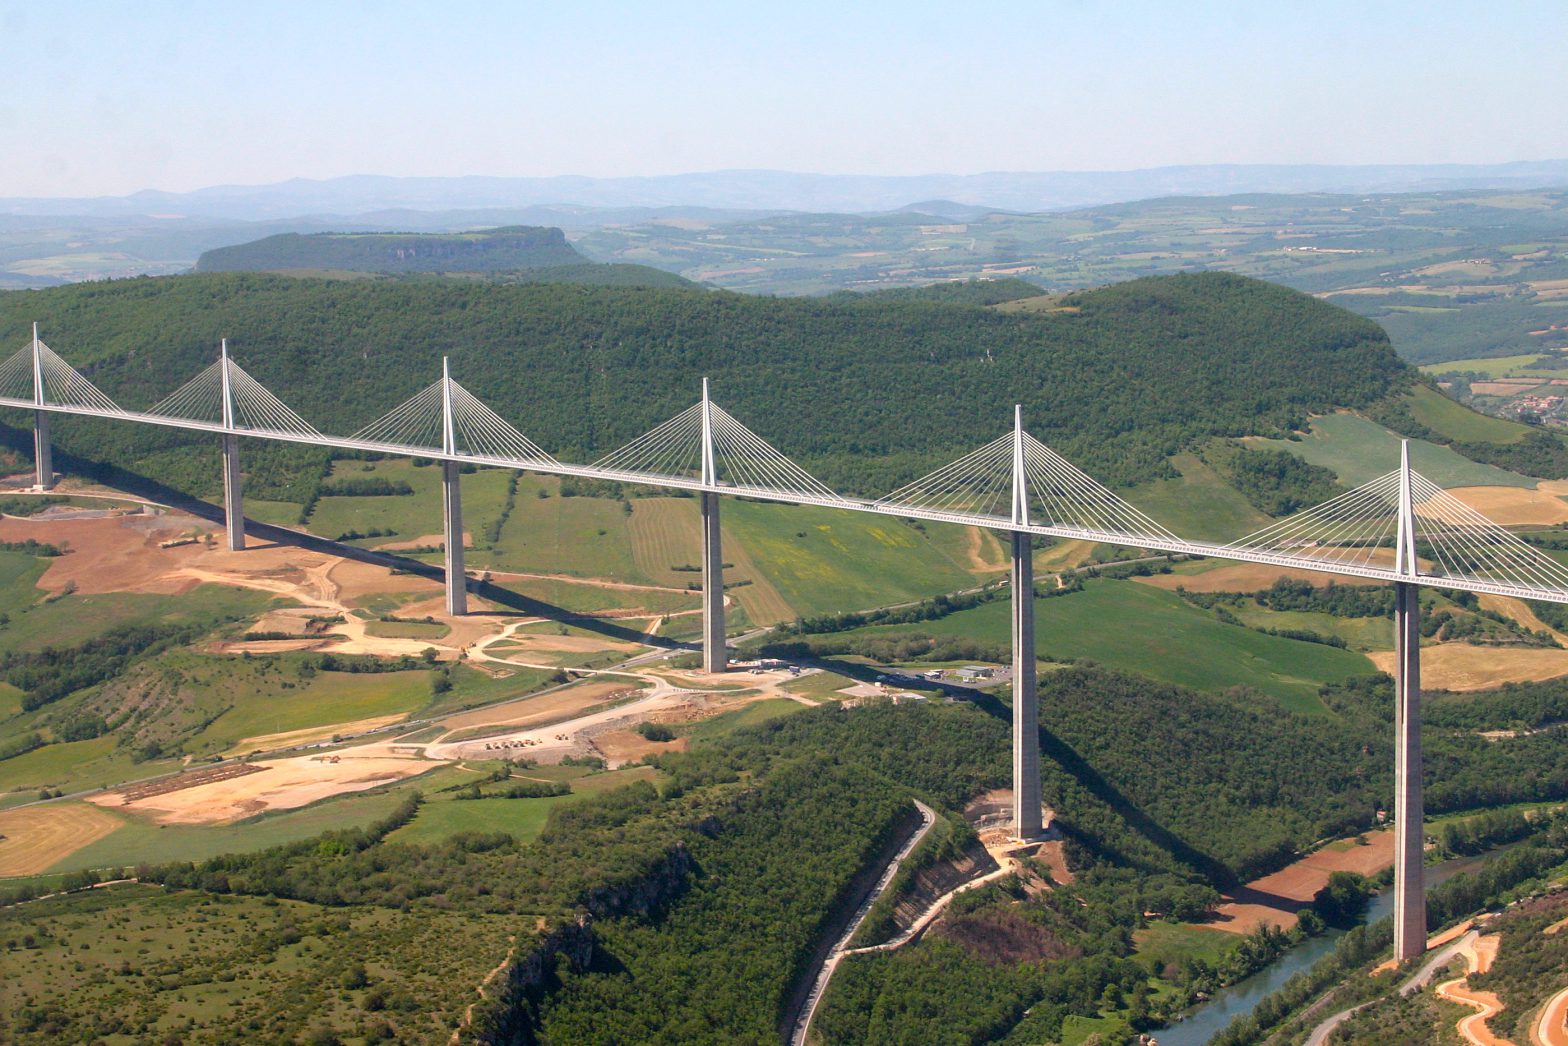 Millau Viaduct from above